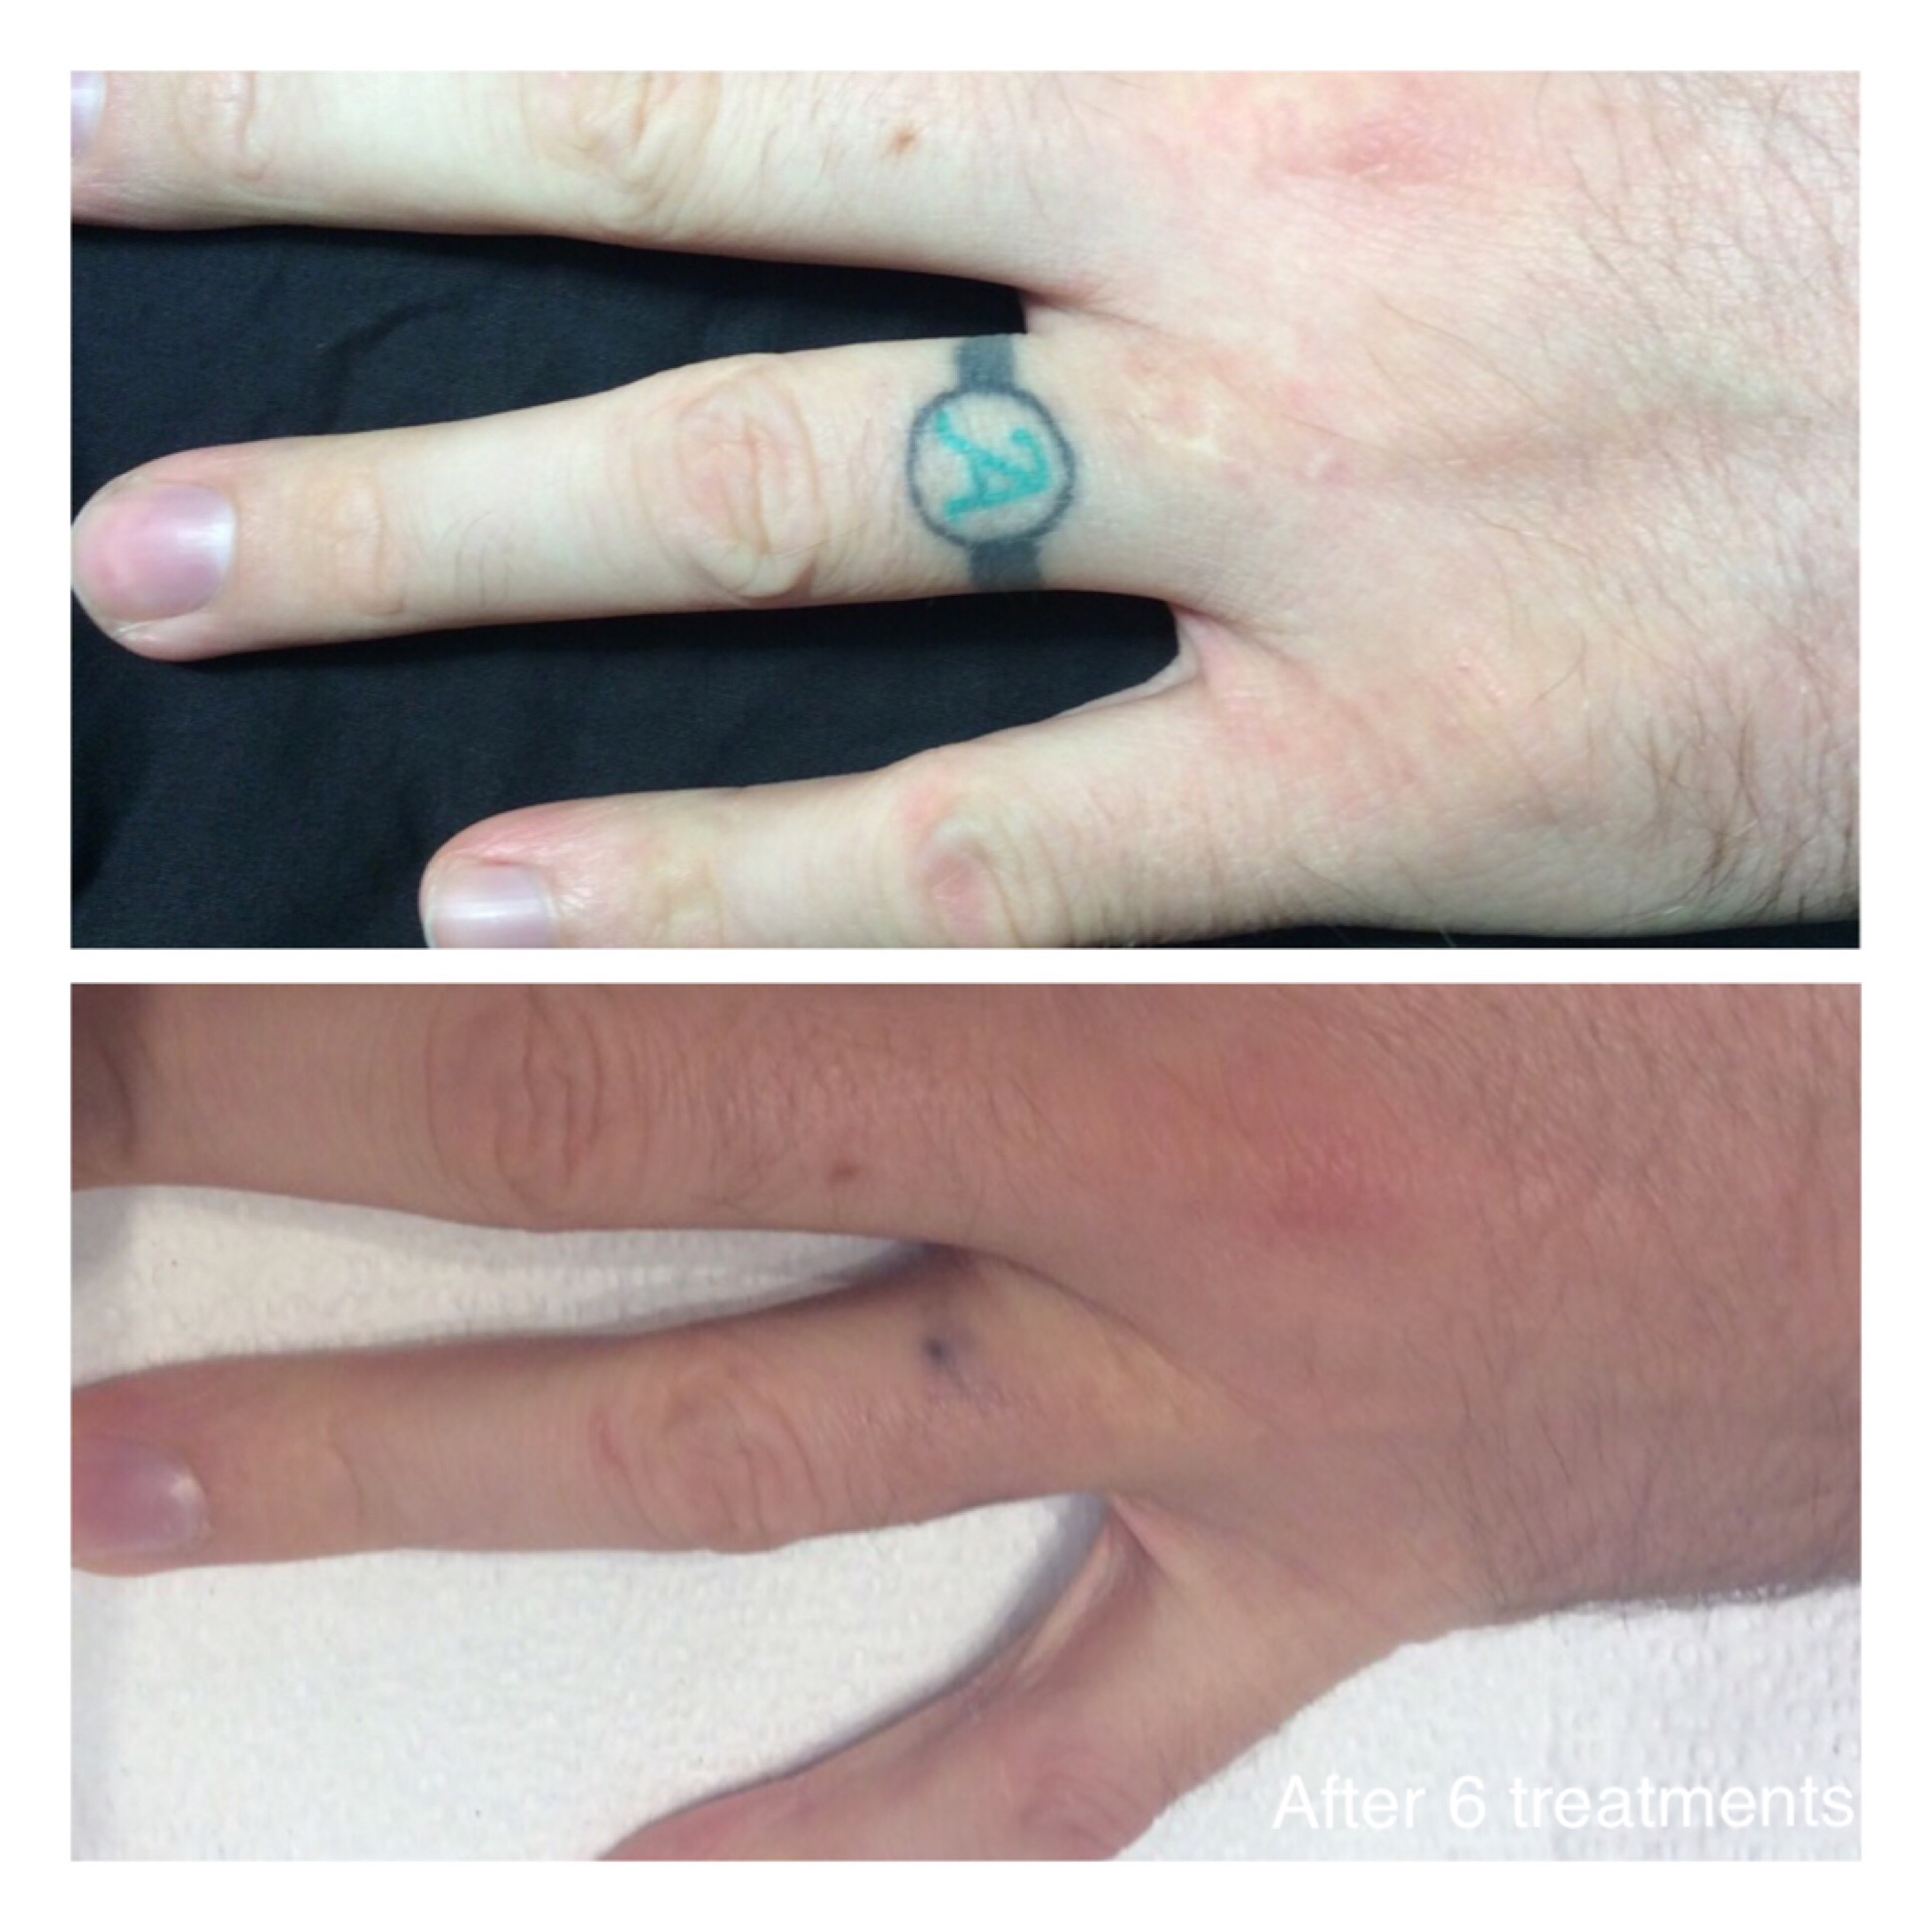 Before and after top and bottom of tattoo removal for a ring tattoo on someone's finger